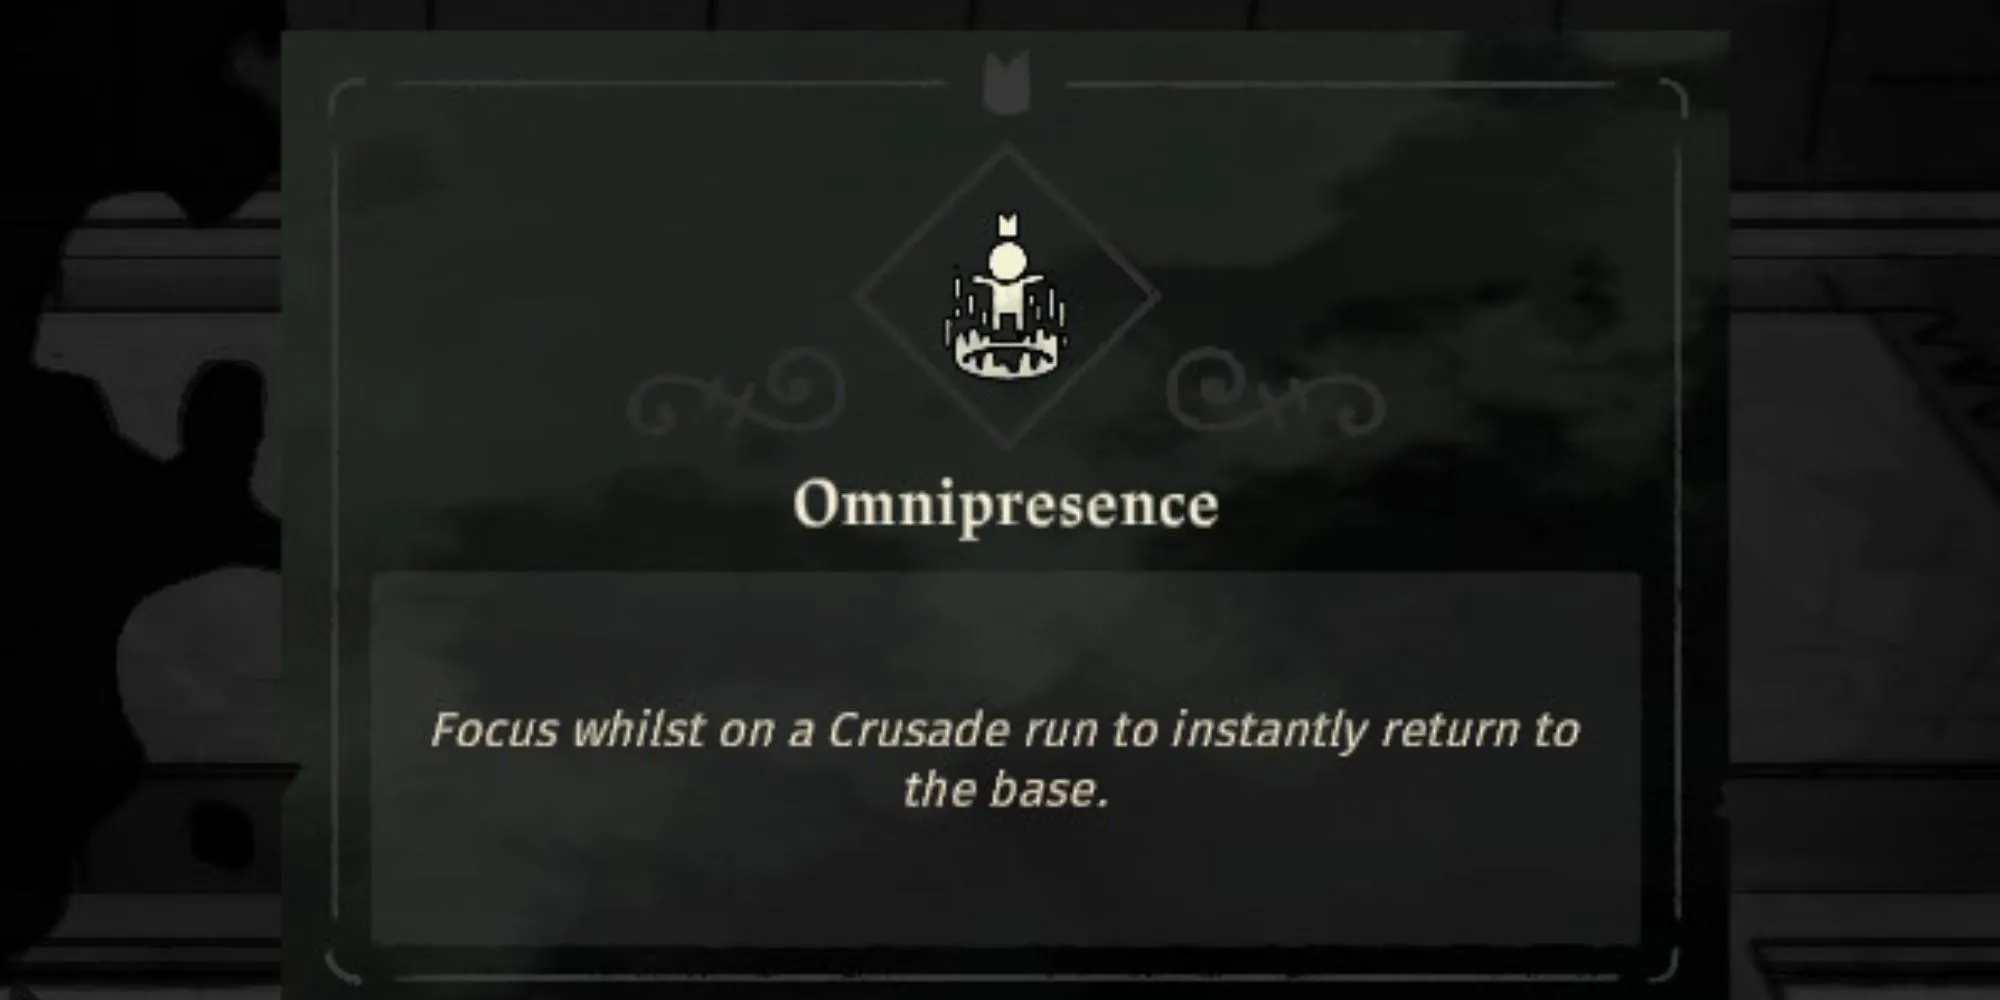 The Omnipresence upgrade in Cult of the Lamb